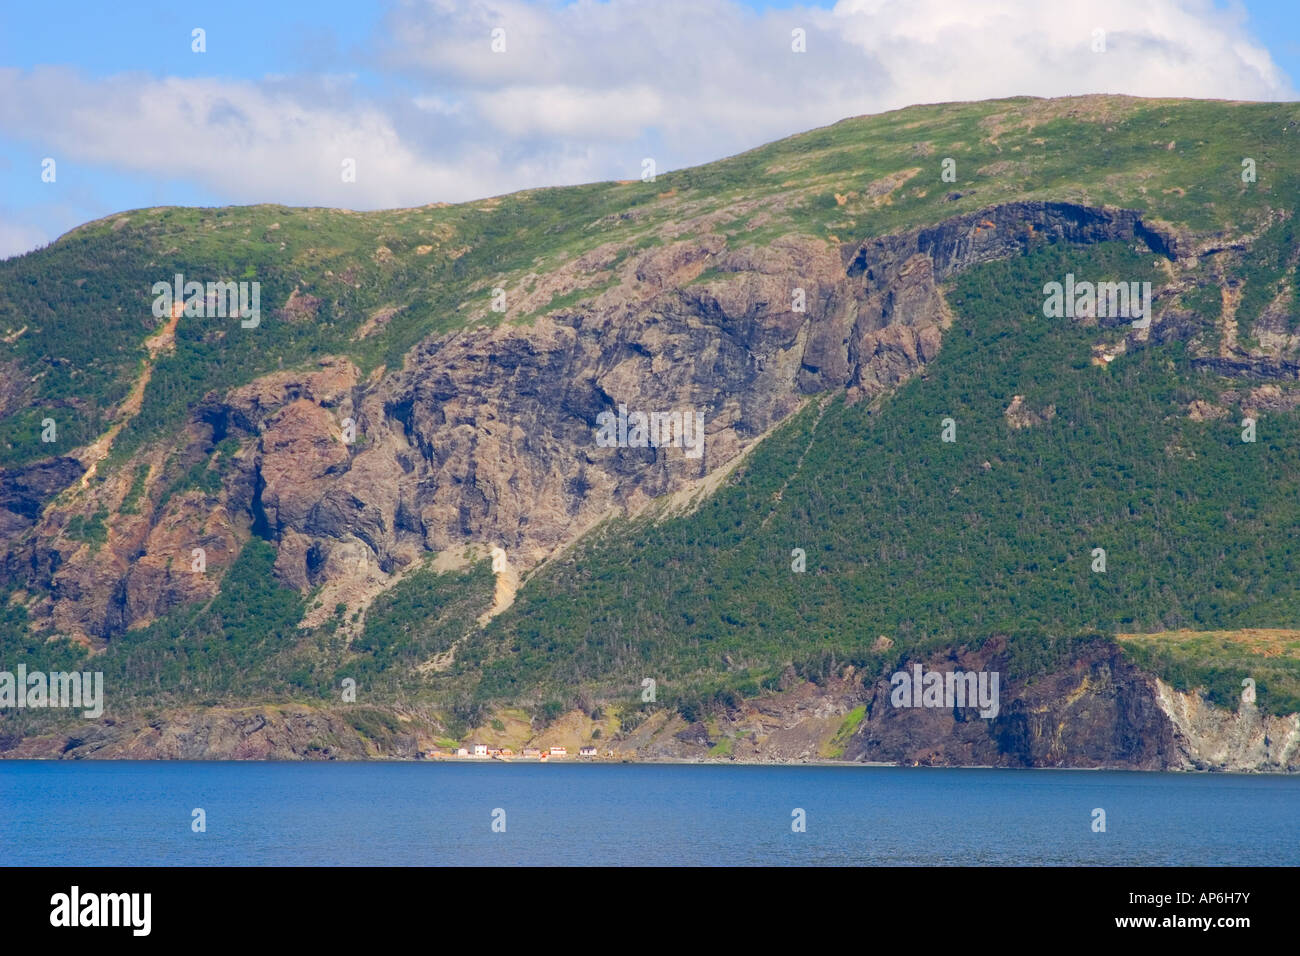 Towering cliffs dwarf a small outport village on the Bay of Islands Newfoundland Stock Photo